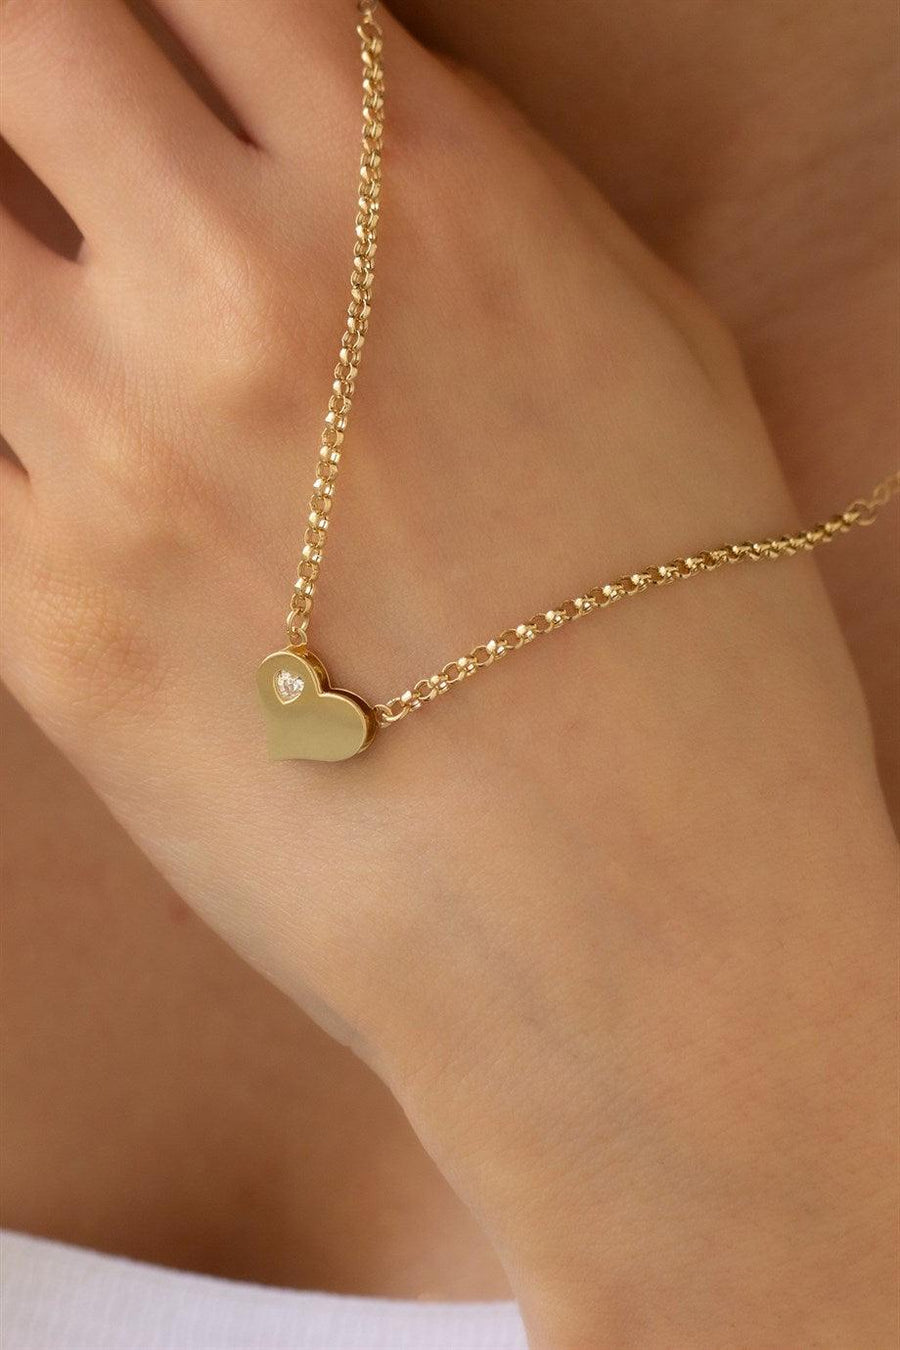 Gold -Hearted Necklace